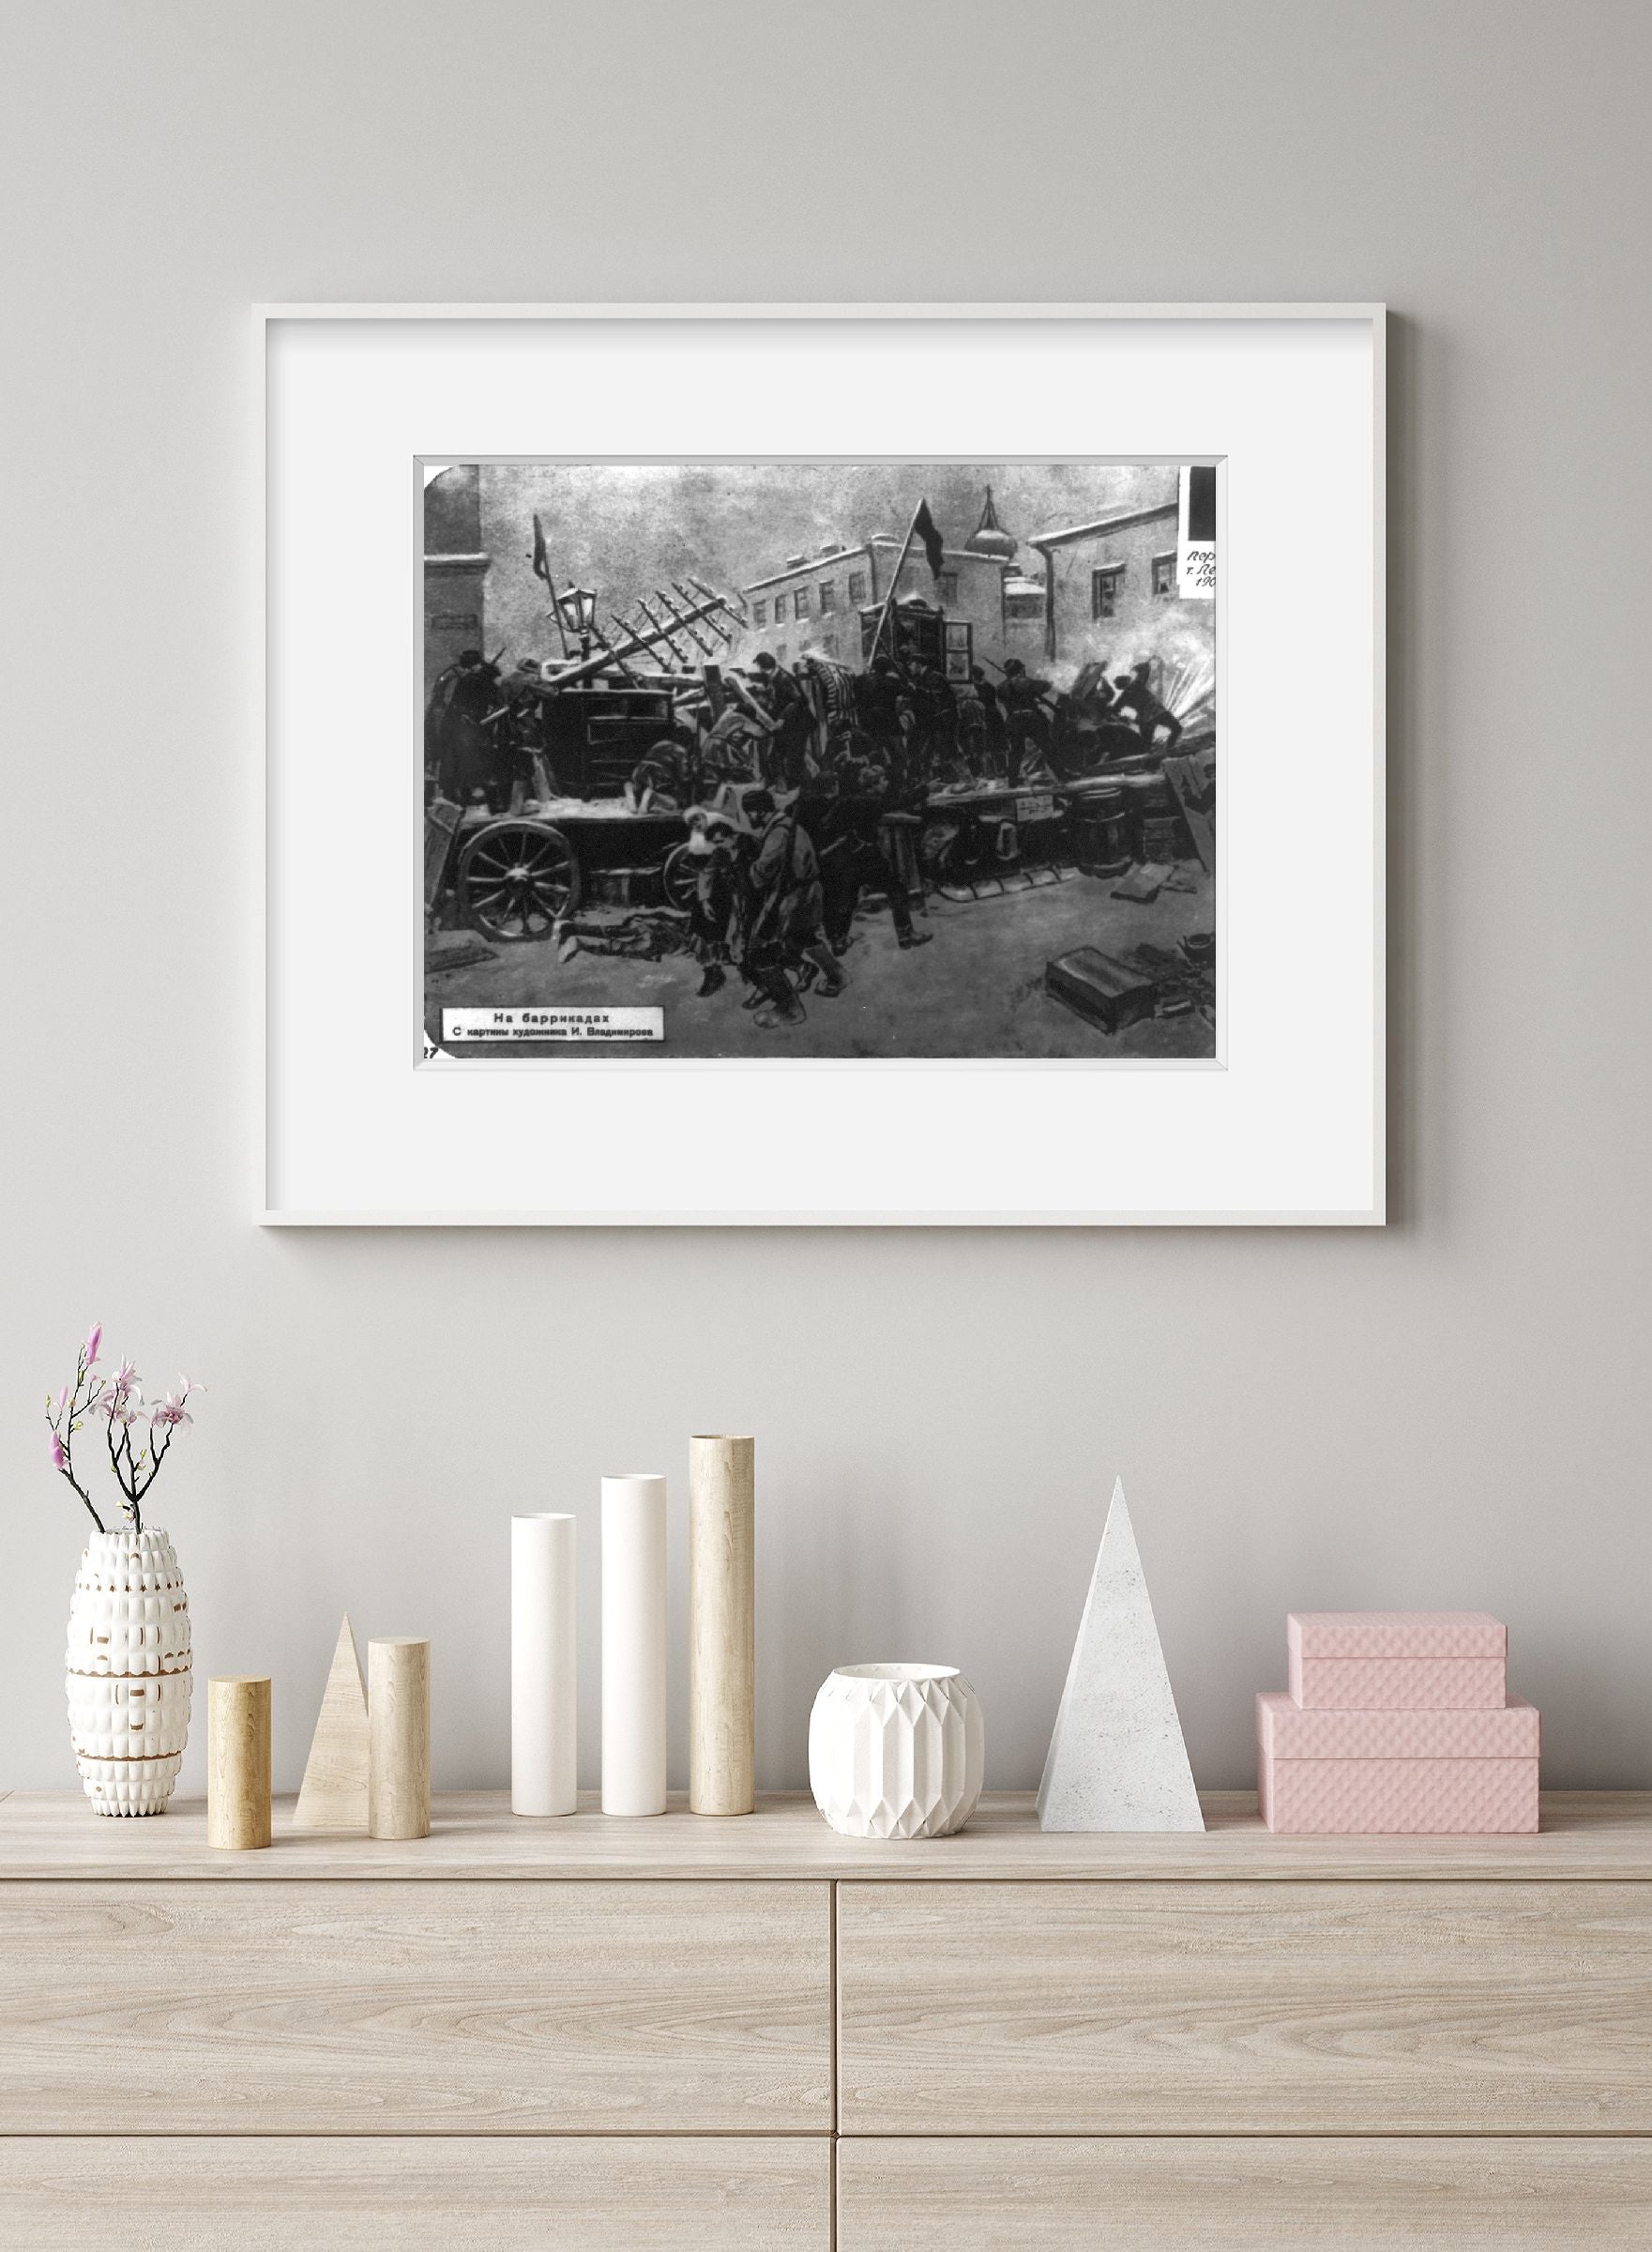 Vintage photograph: Russian workers fighting from behind barricades during revol